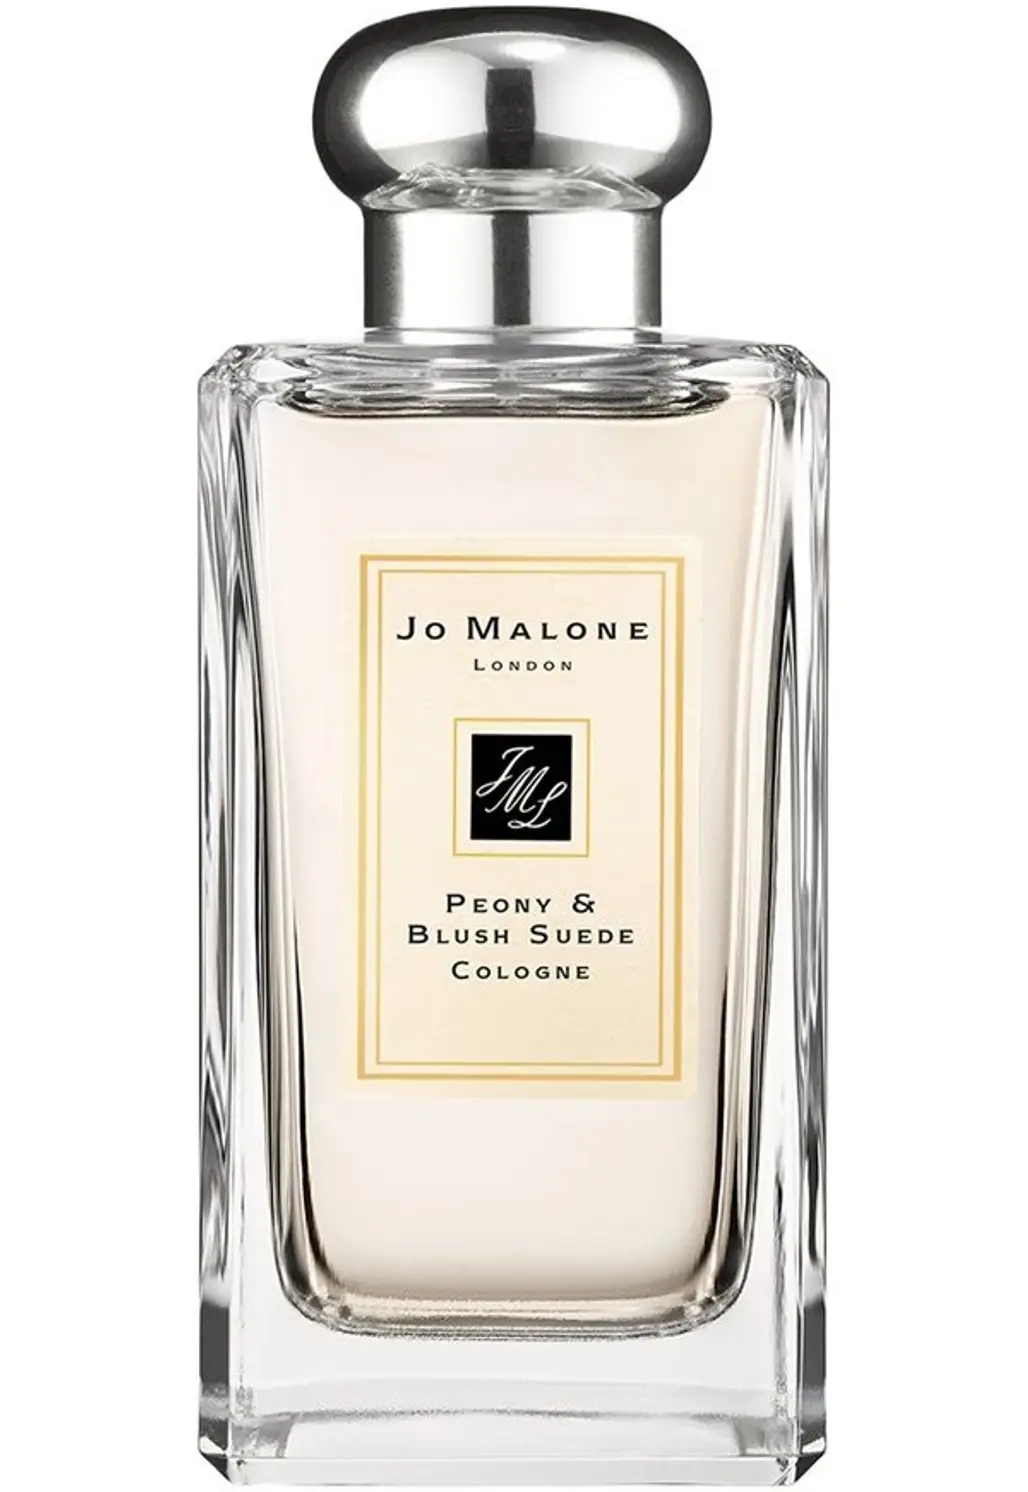 Peony and Blush Suede Cologne - Jo Malone